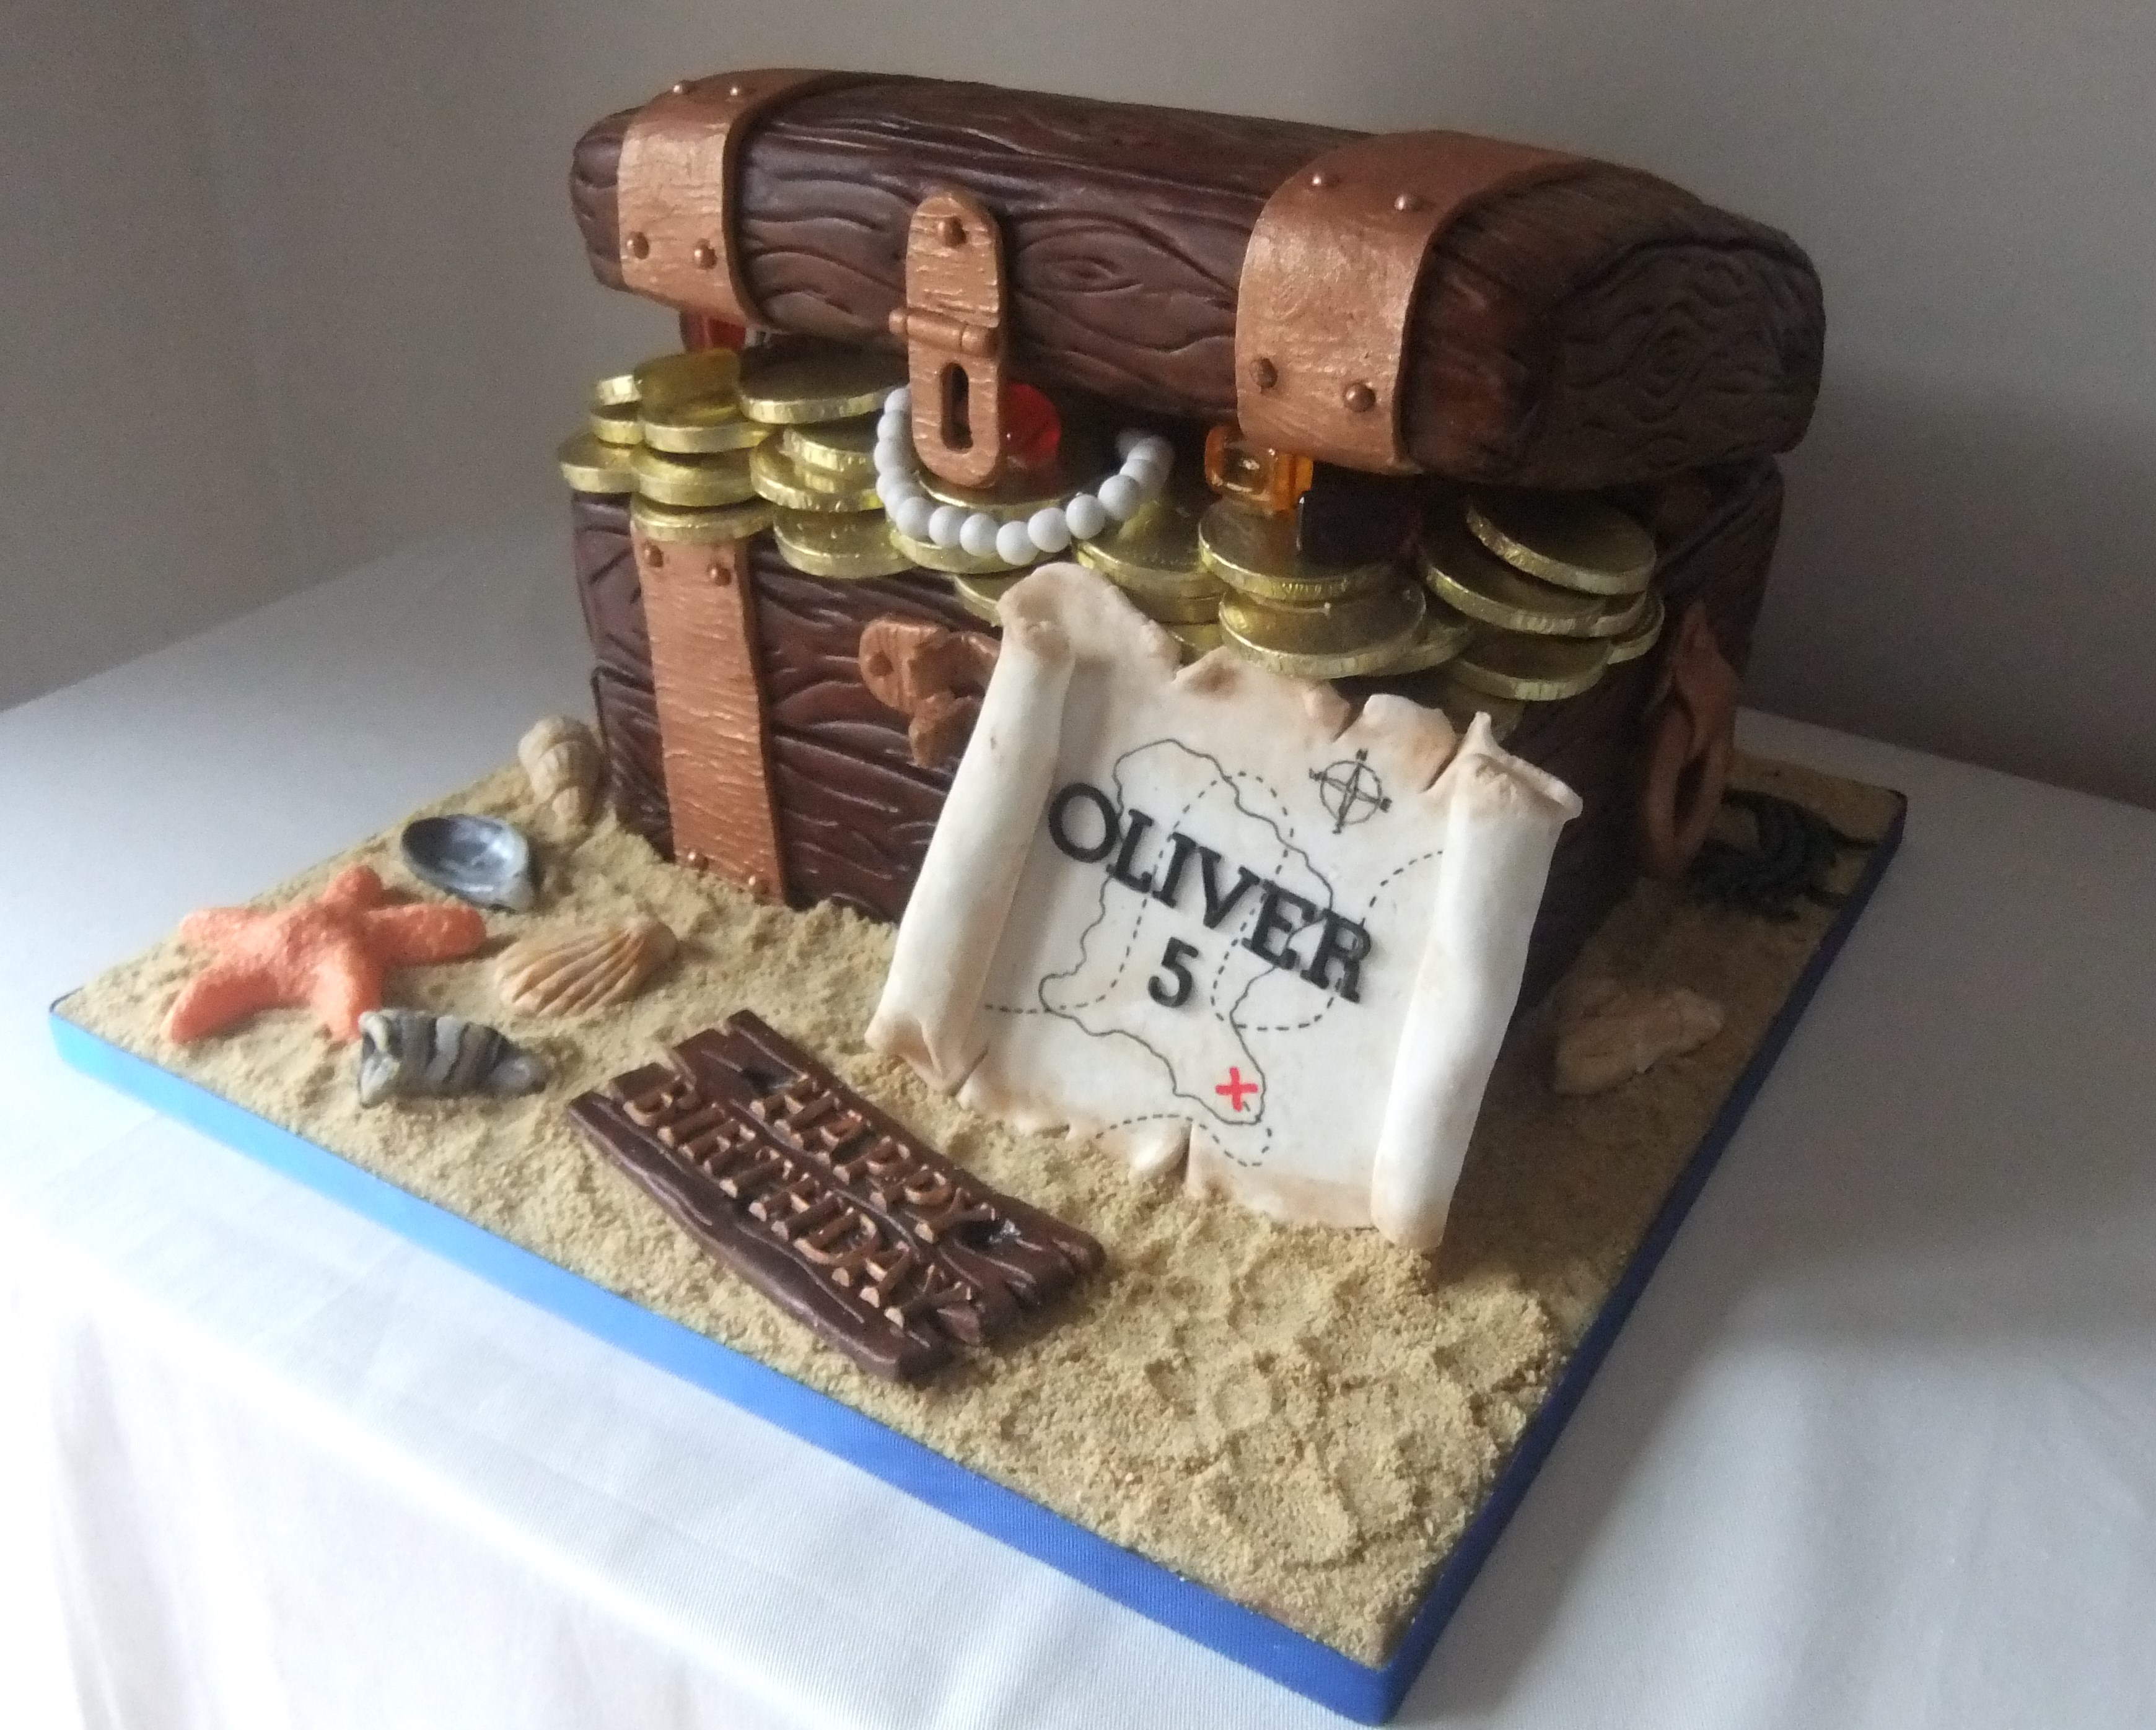 Pirate treasure chest cake - The Great British Bake Off | The Great